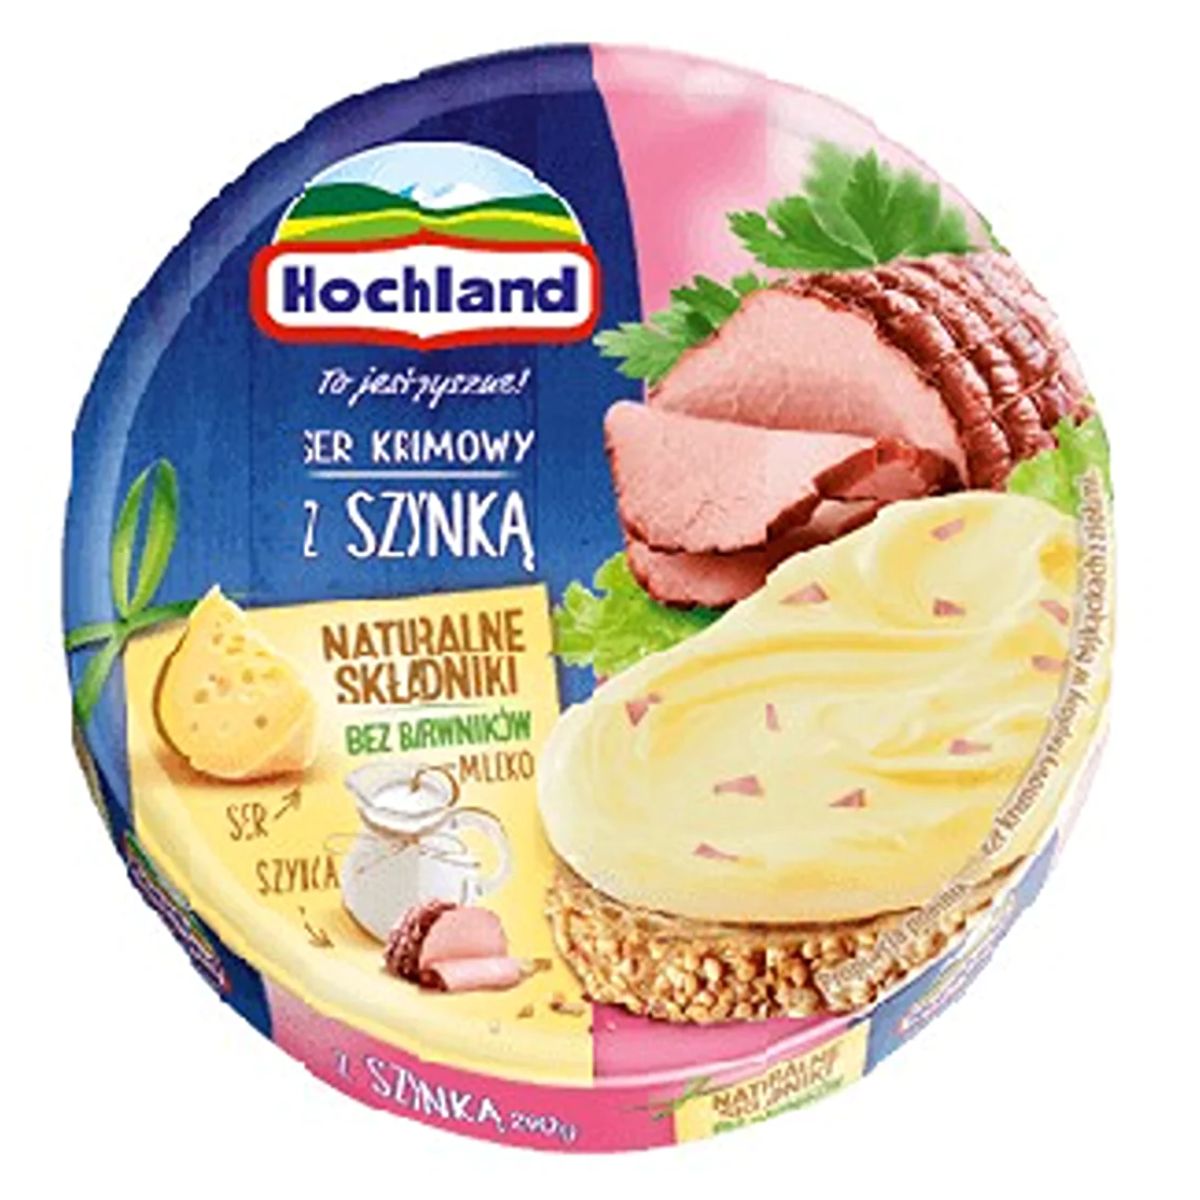 Round Hochland - Cream Cheese with Ham - 180g packaging with images of sliced cheese, meat, and herbs.